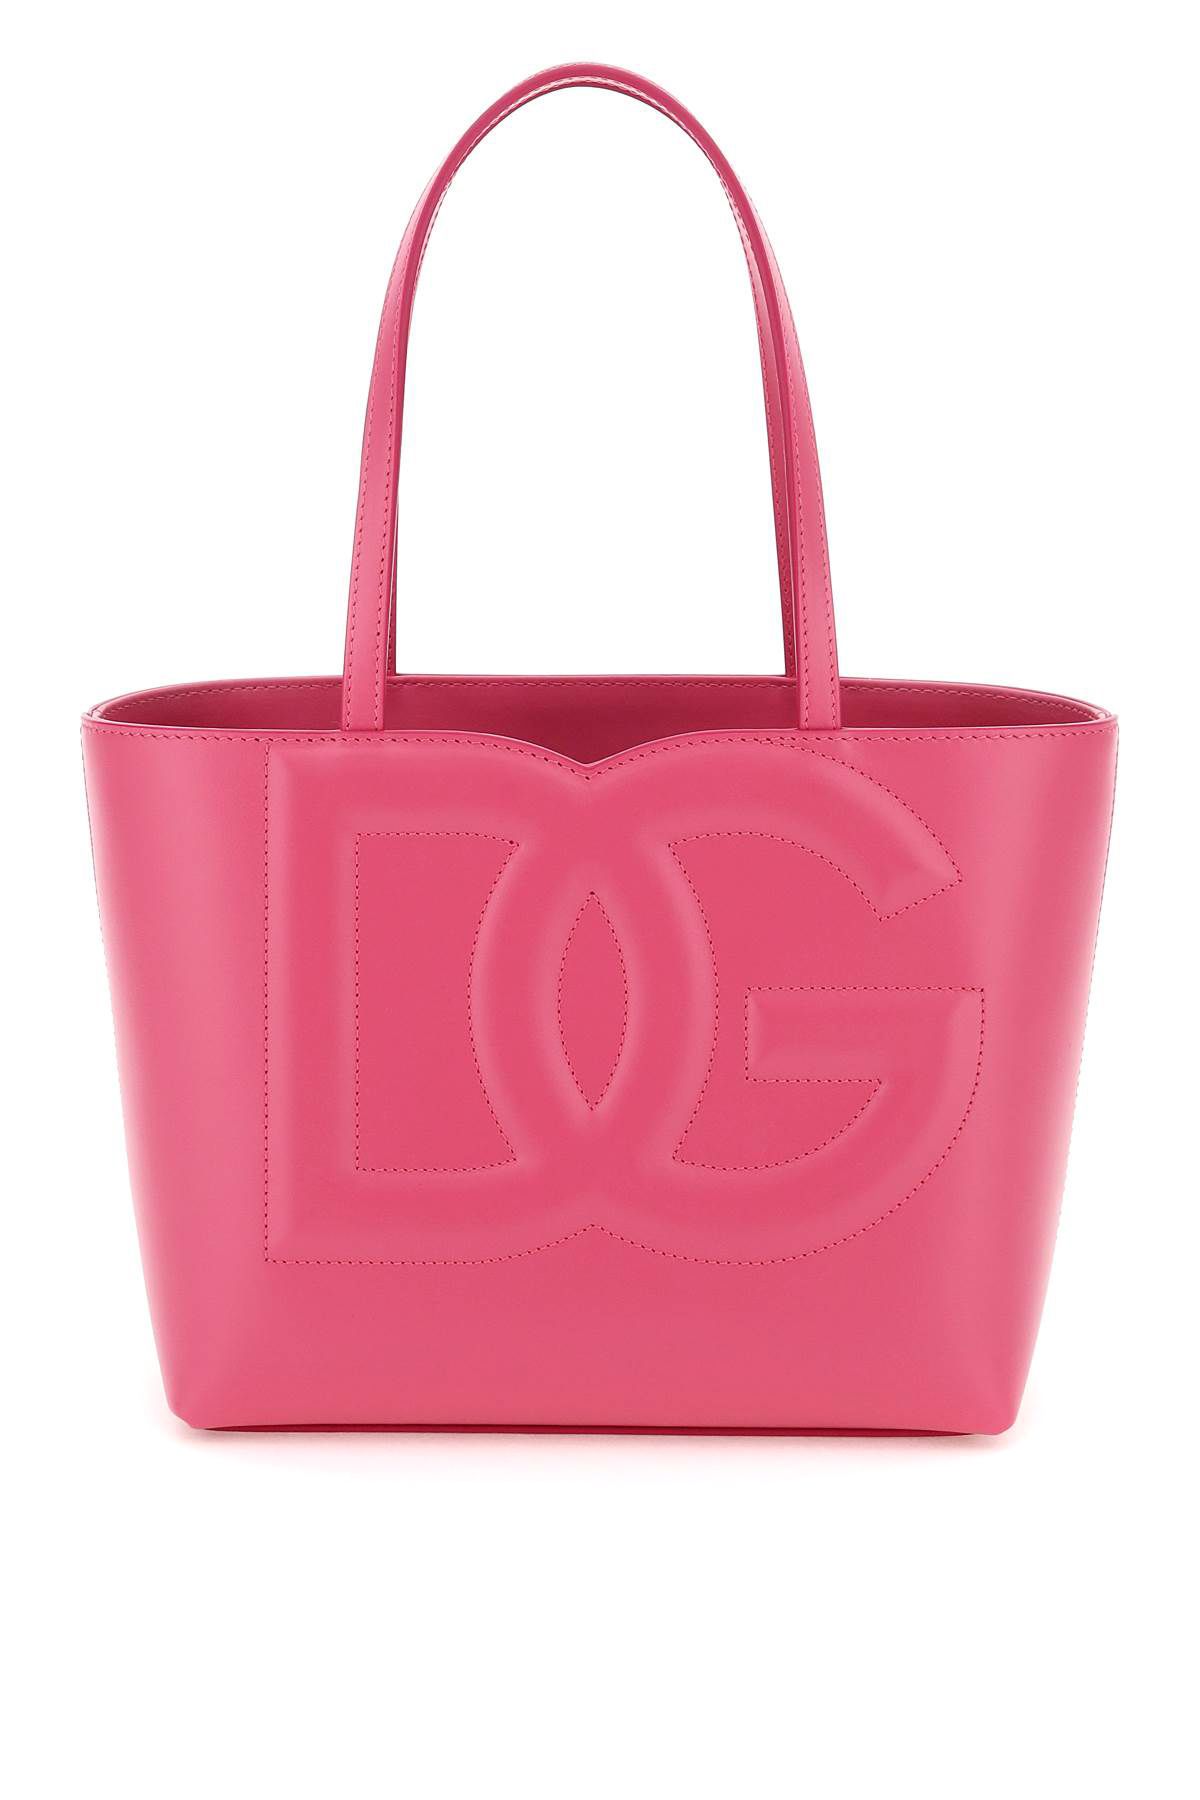 Dolce & Gabbana Leather Tote Bag In Pink